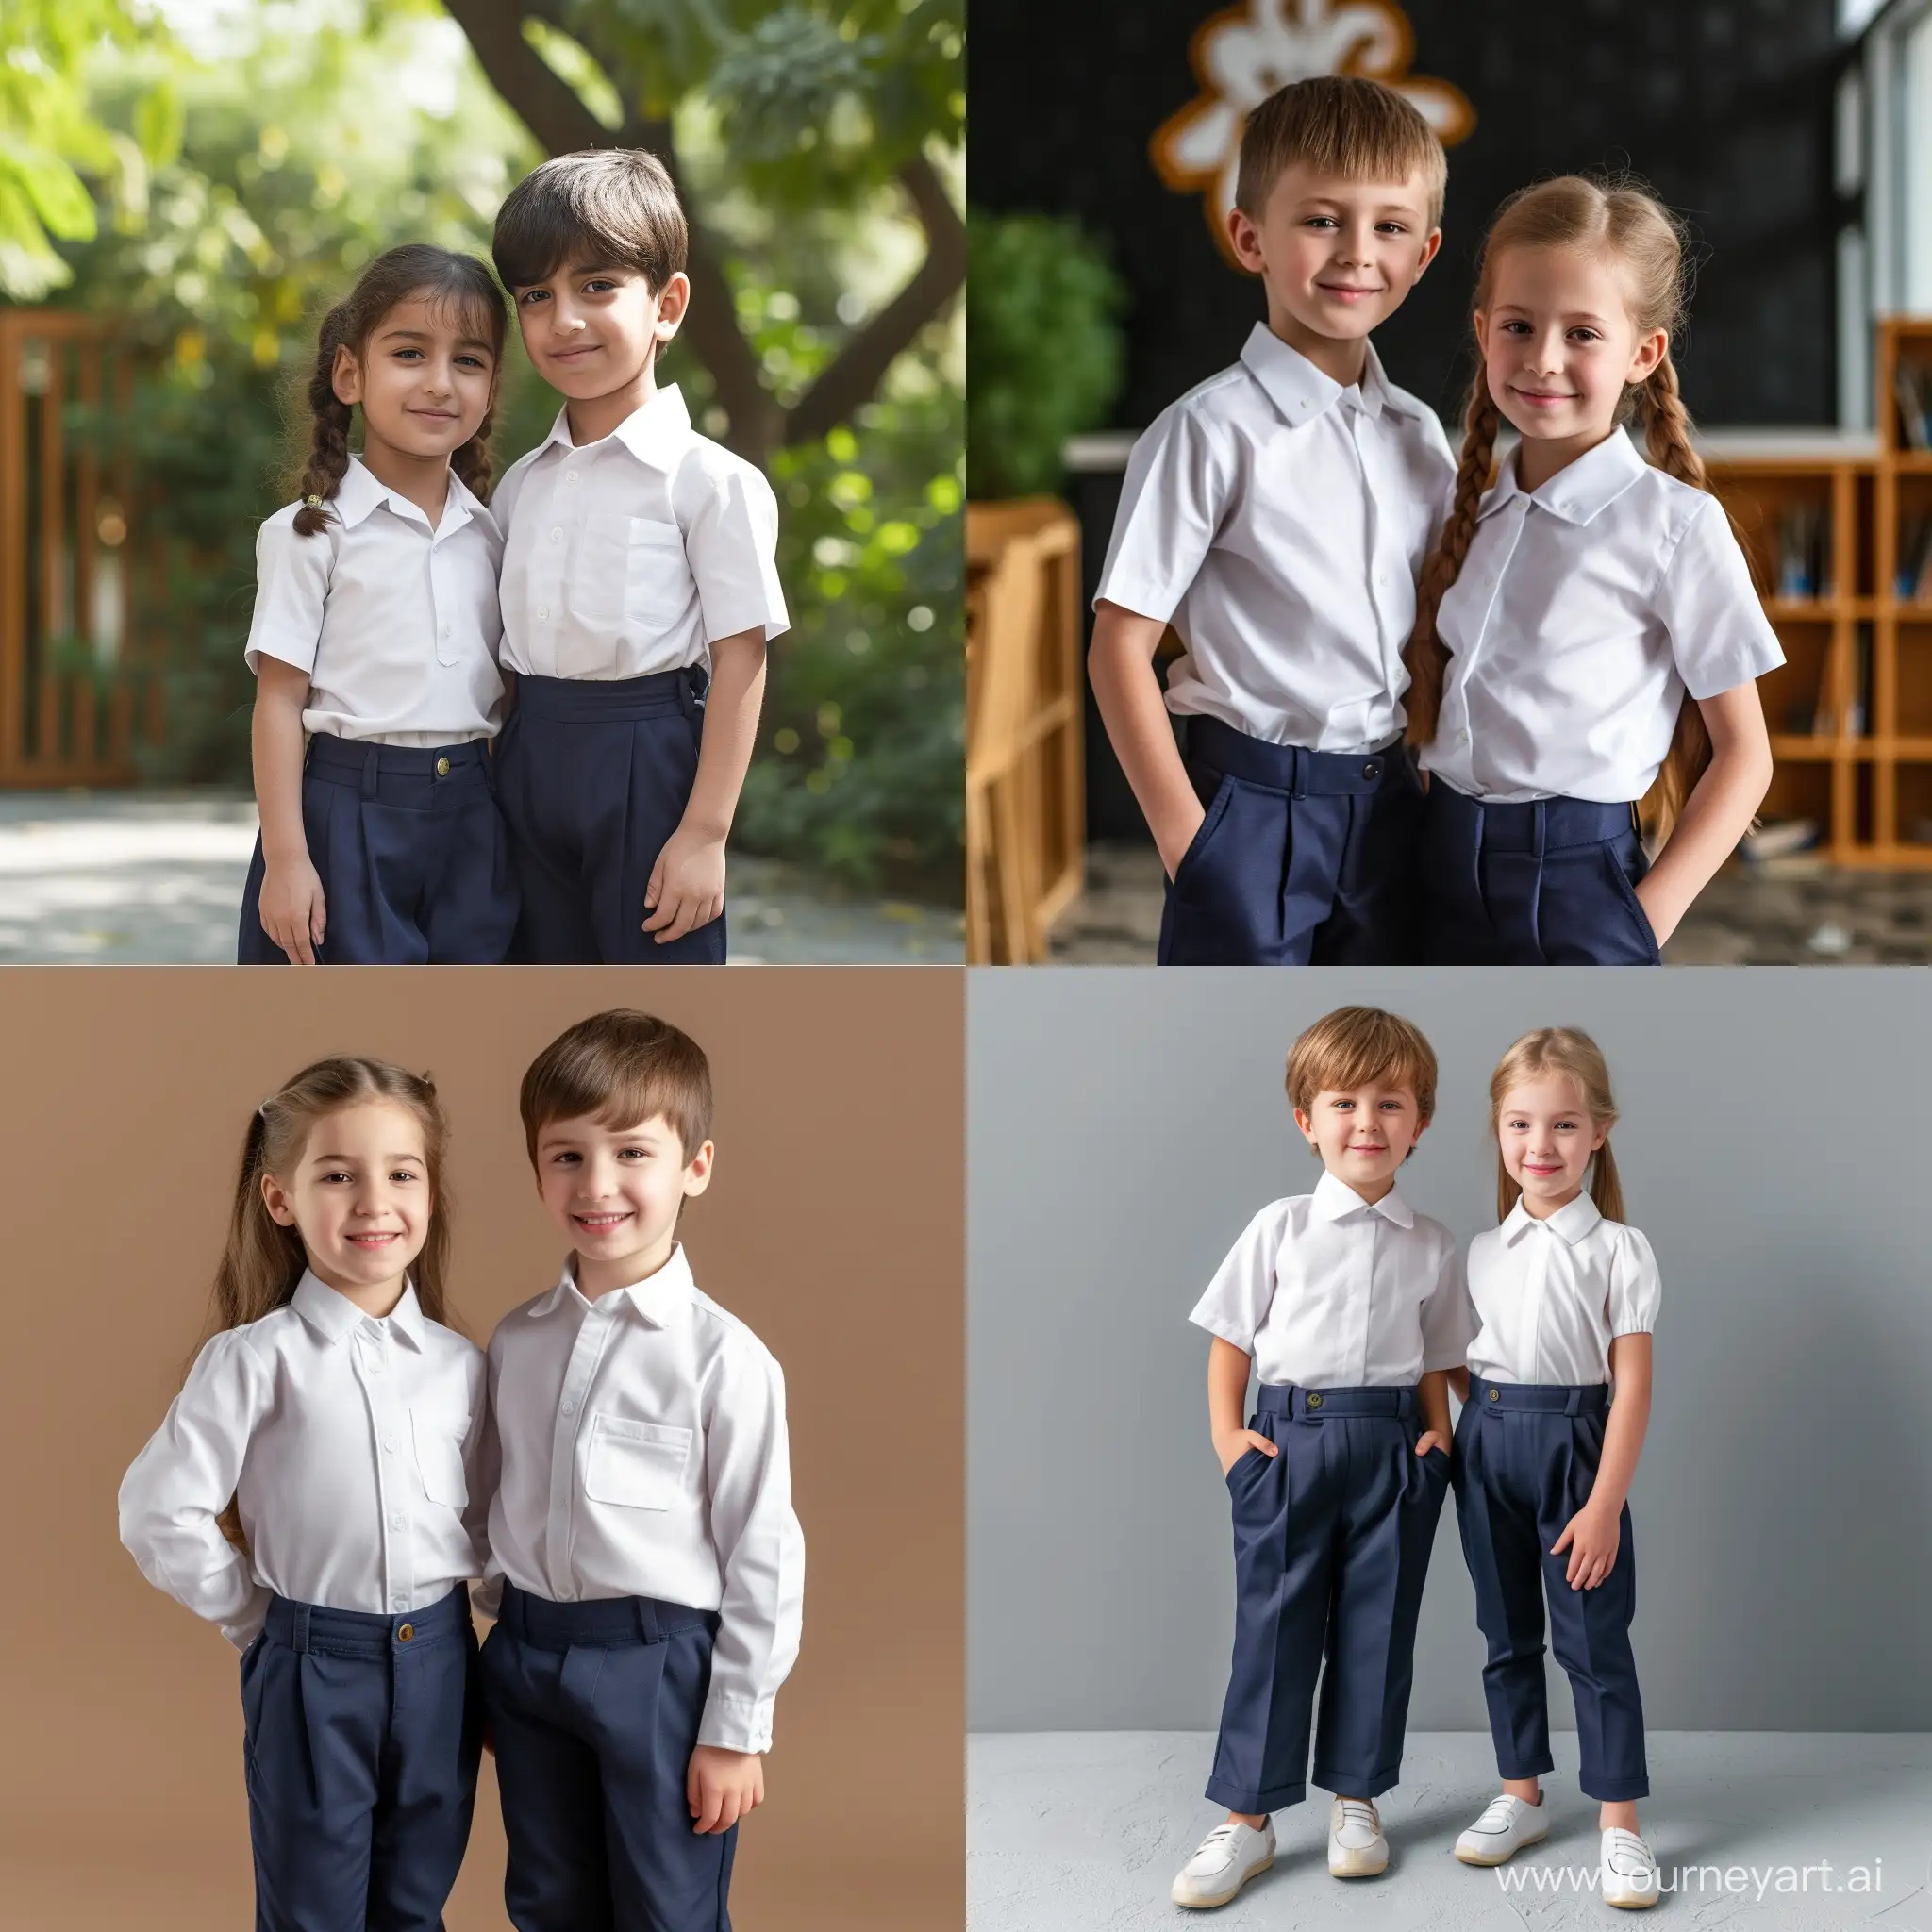 Adorable-Private-School-Kids-in-Uniform-7YearOld-Boy-and-Girl-in-White-Shirts-and-Dark-Blue-Trousers